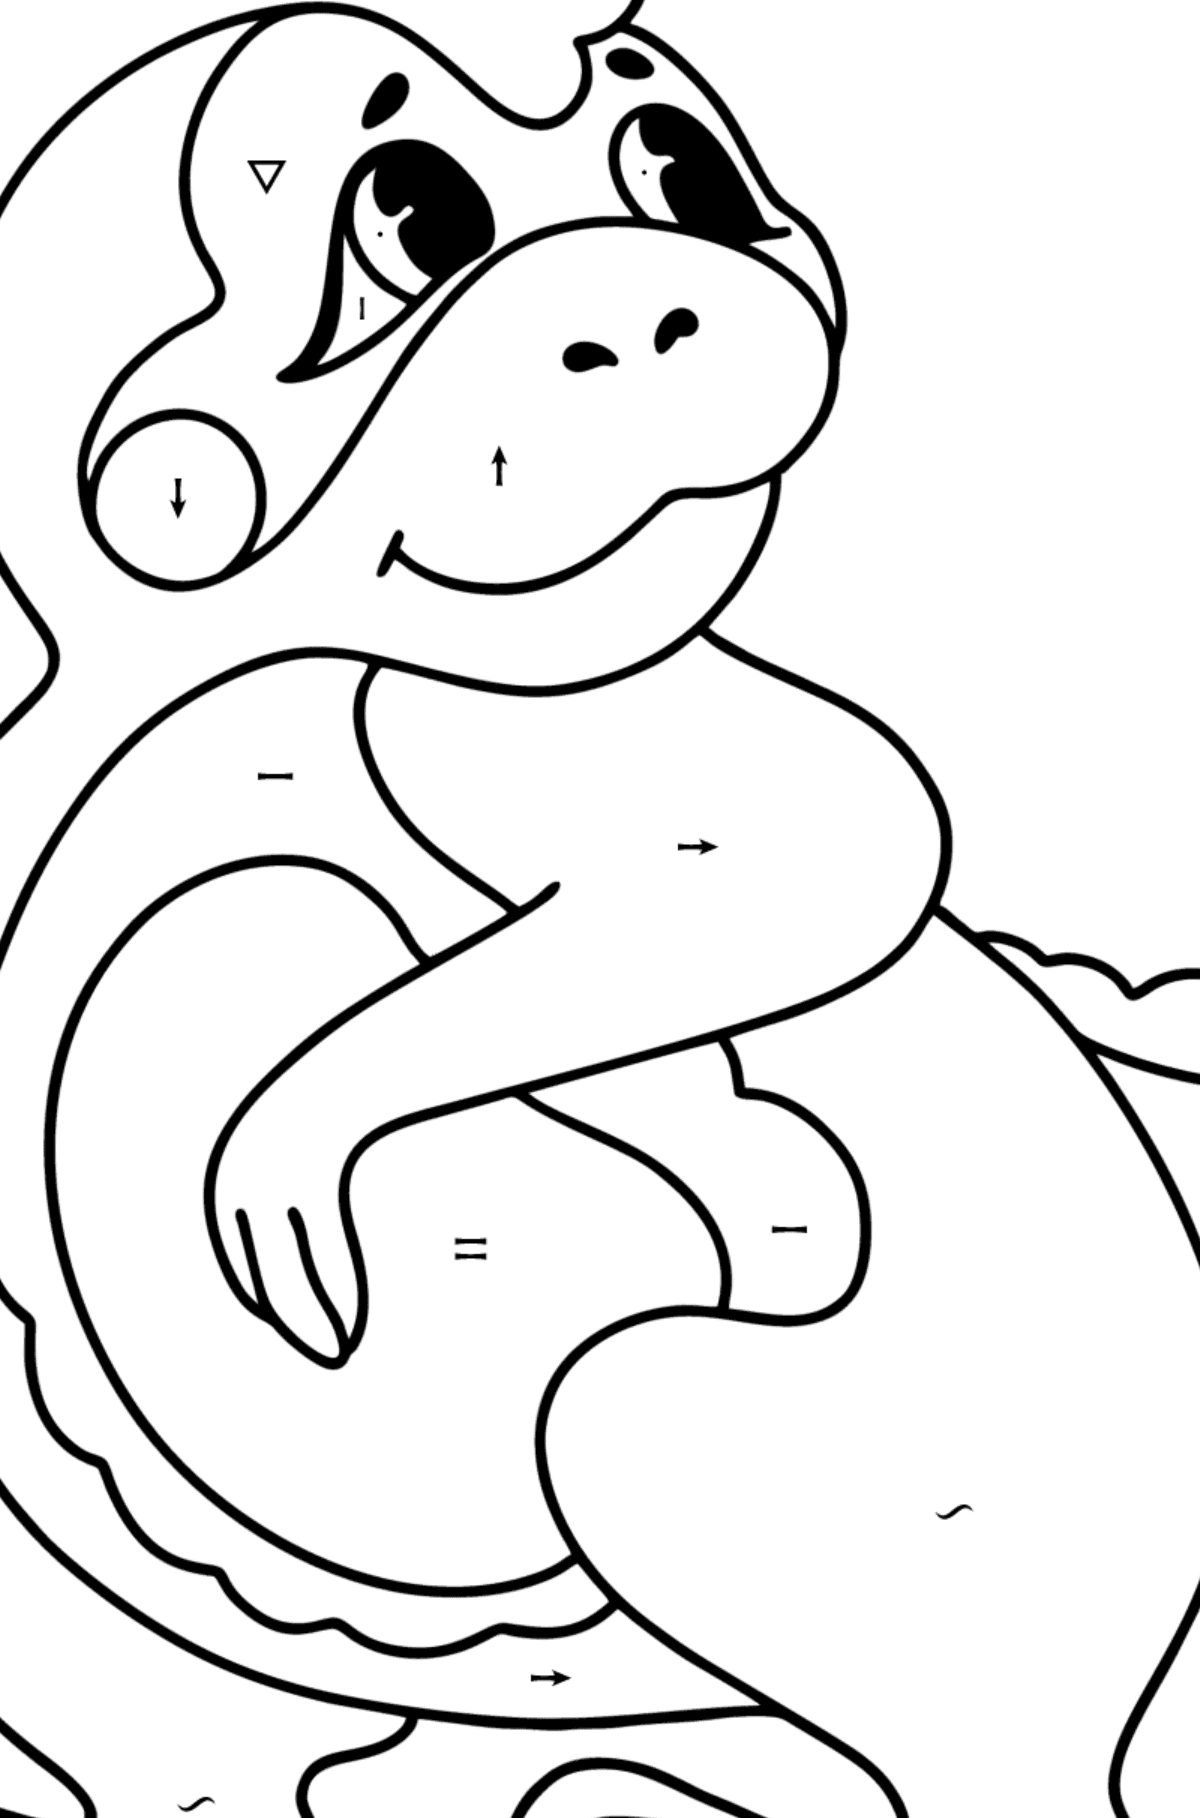 Baby dragon coloring page - Coloring by Symbols for Kids